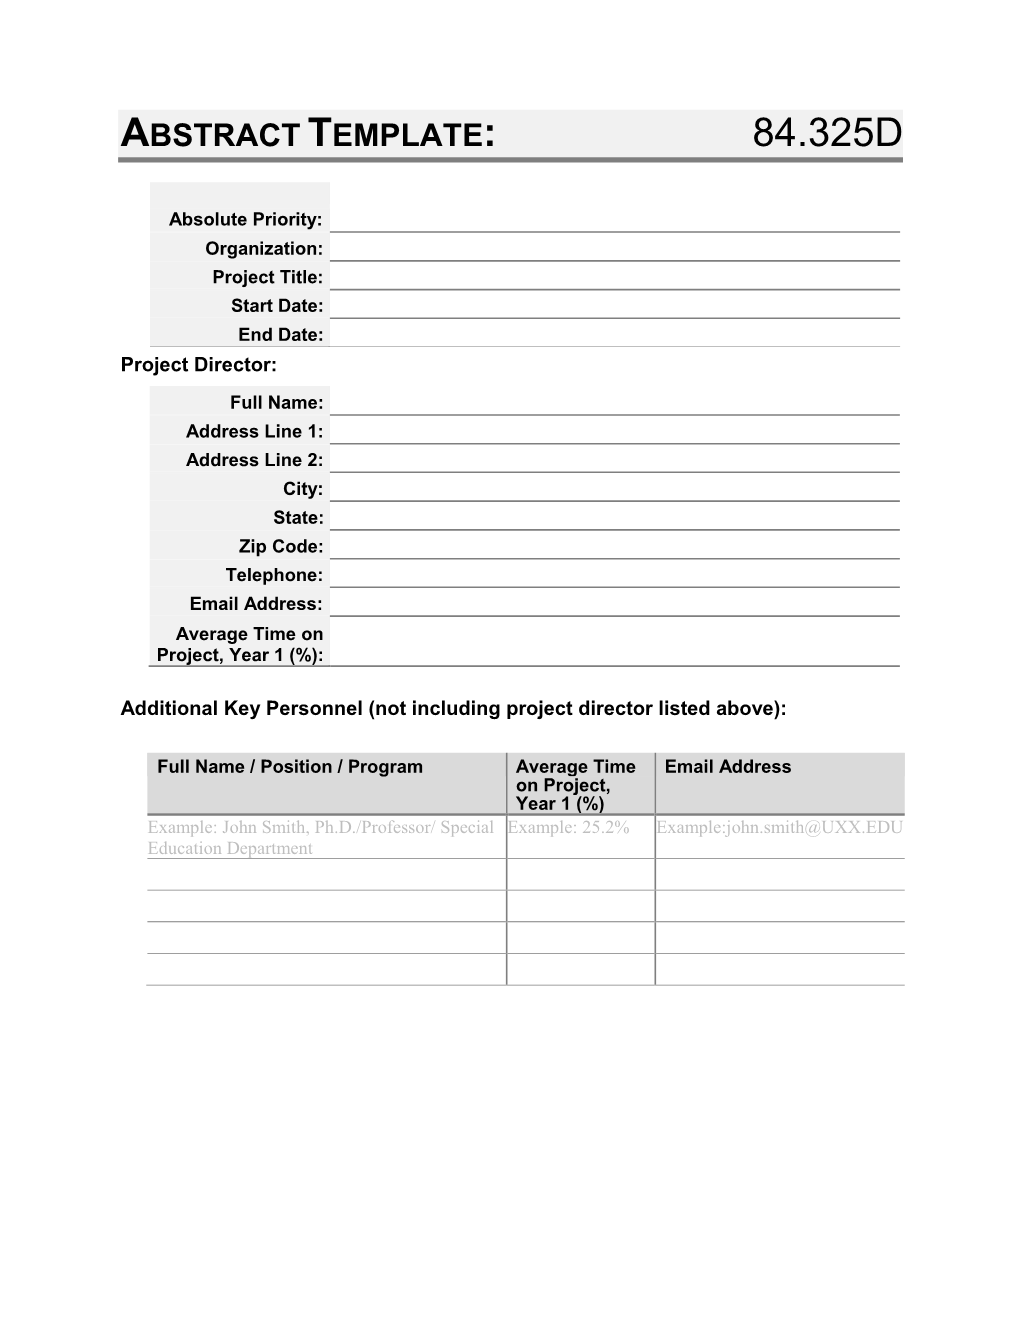 FY 2021 84.325D OSEP Abstract Template Form